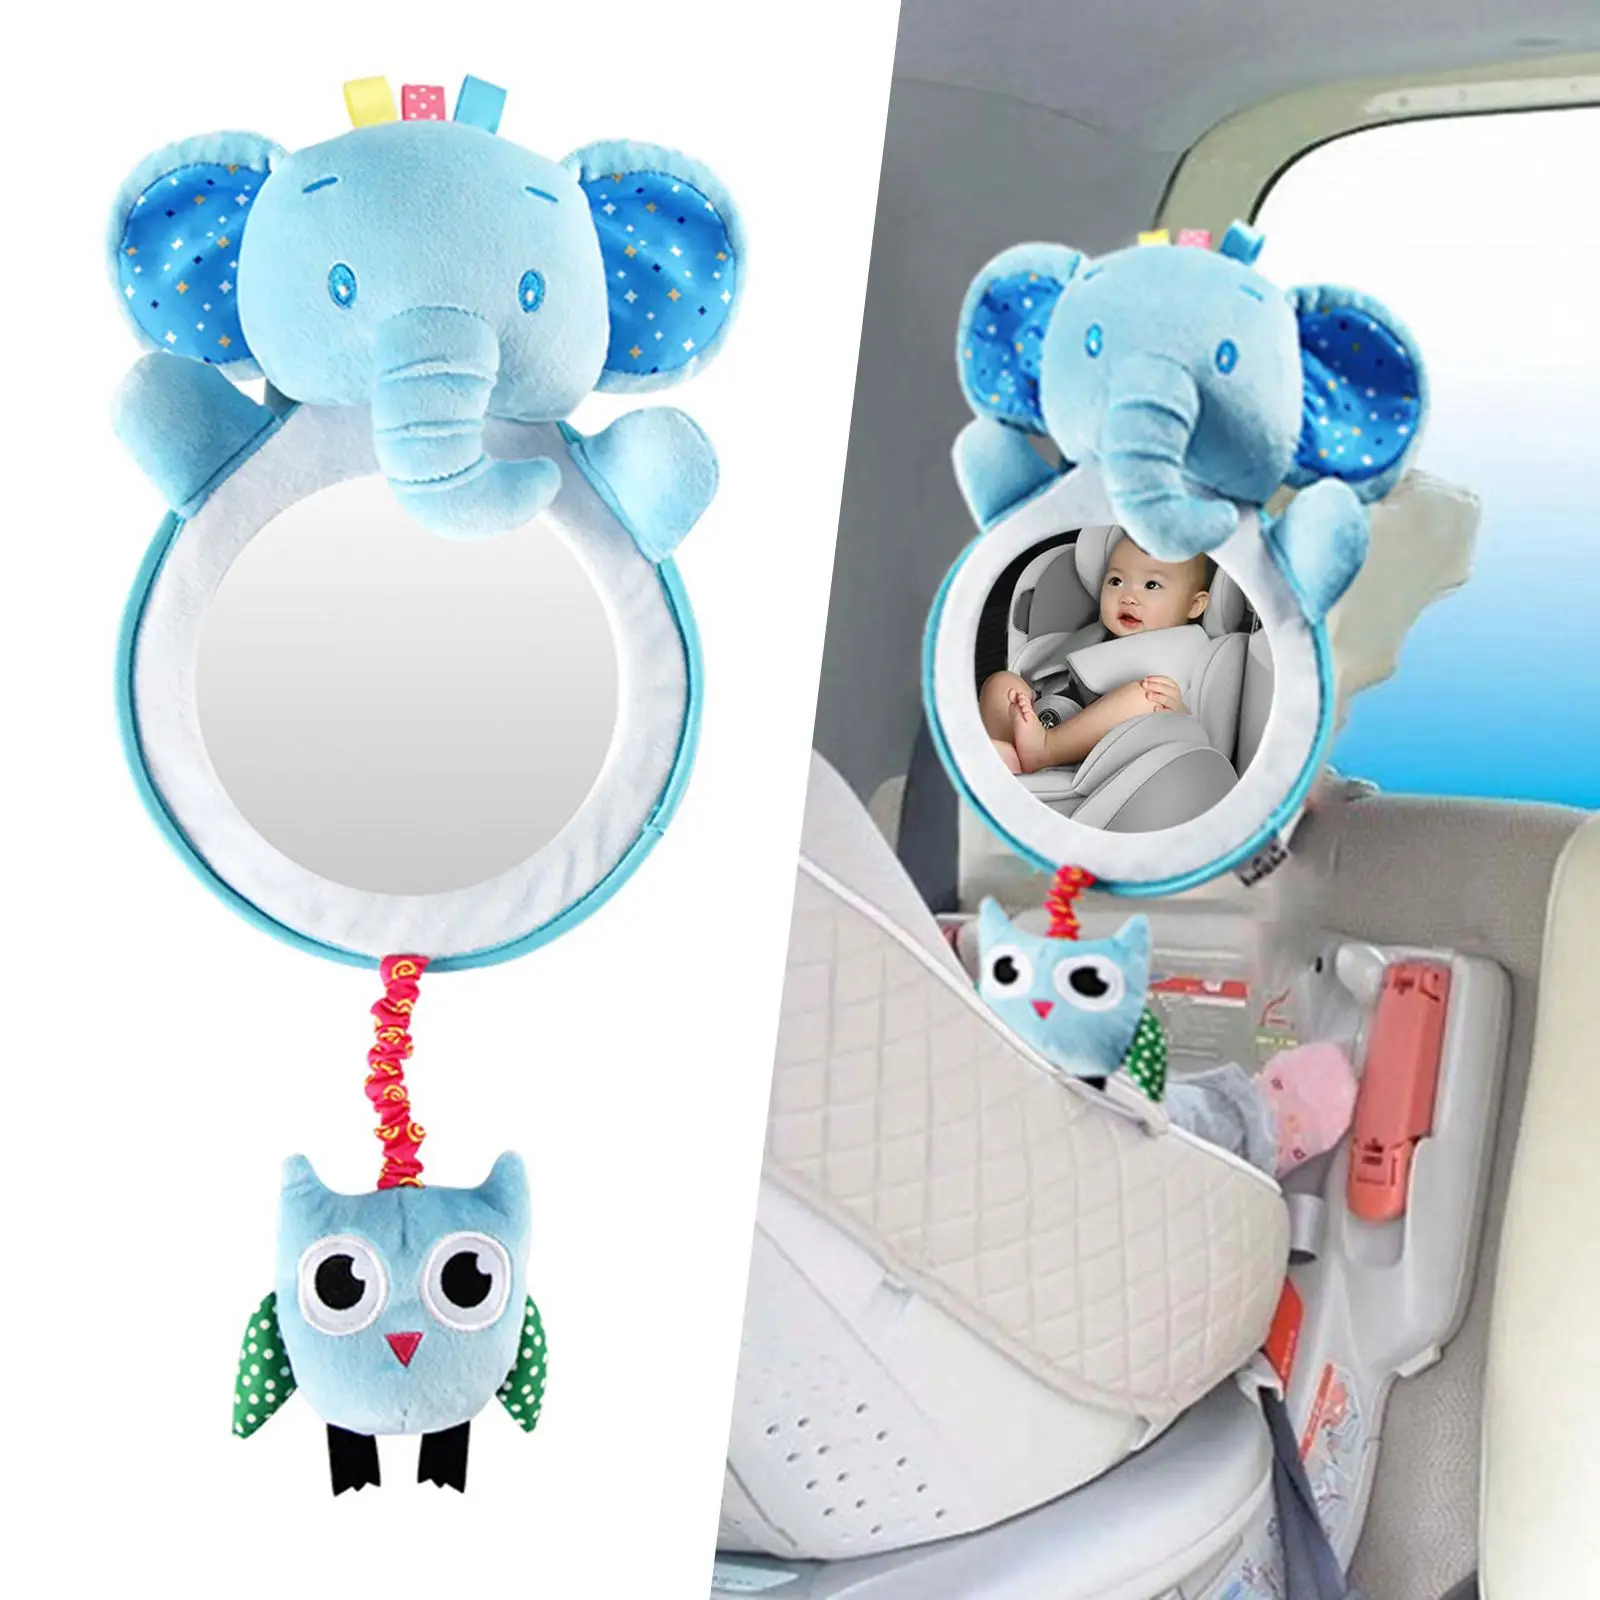 Adjustable Baby Mirror Keep Visible Rearview Mirror Back Seat for Kids